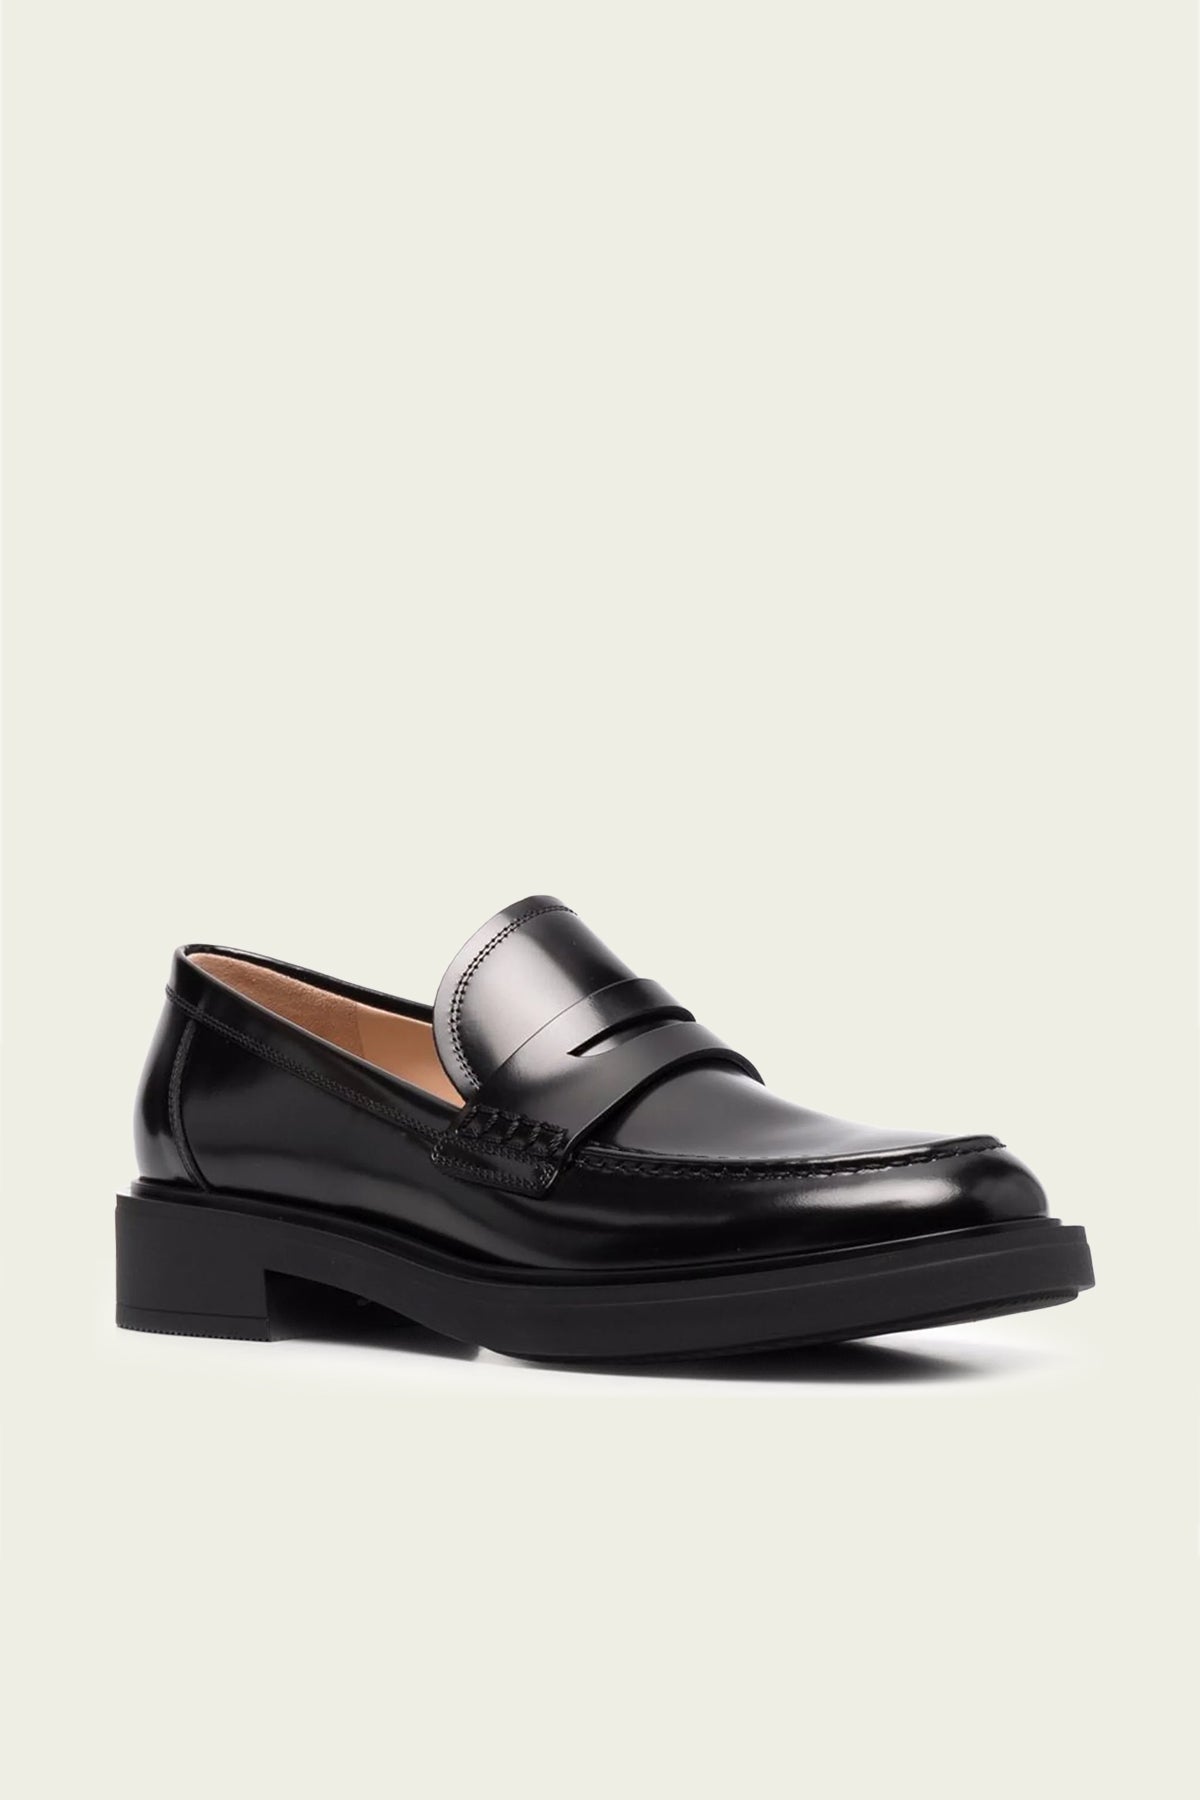 Harris Leather Loafers in Black - shop-olivia.com